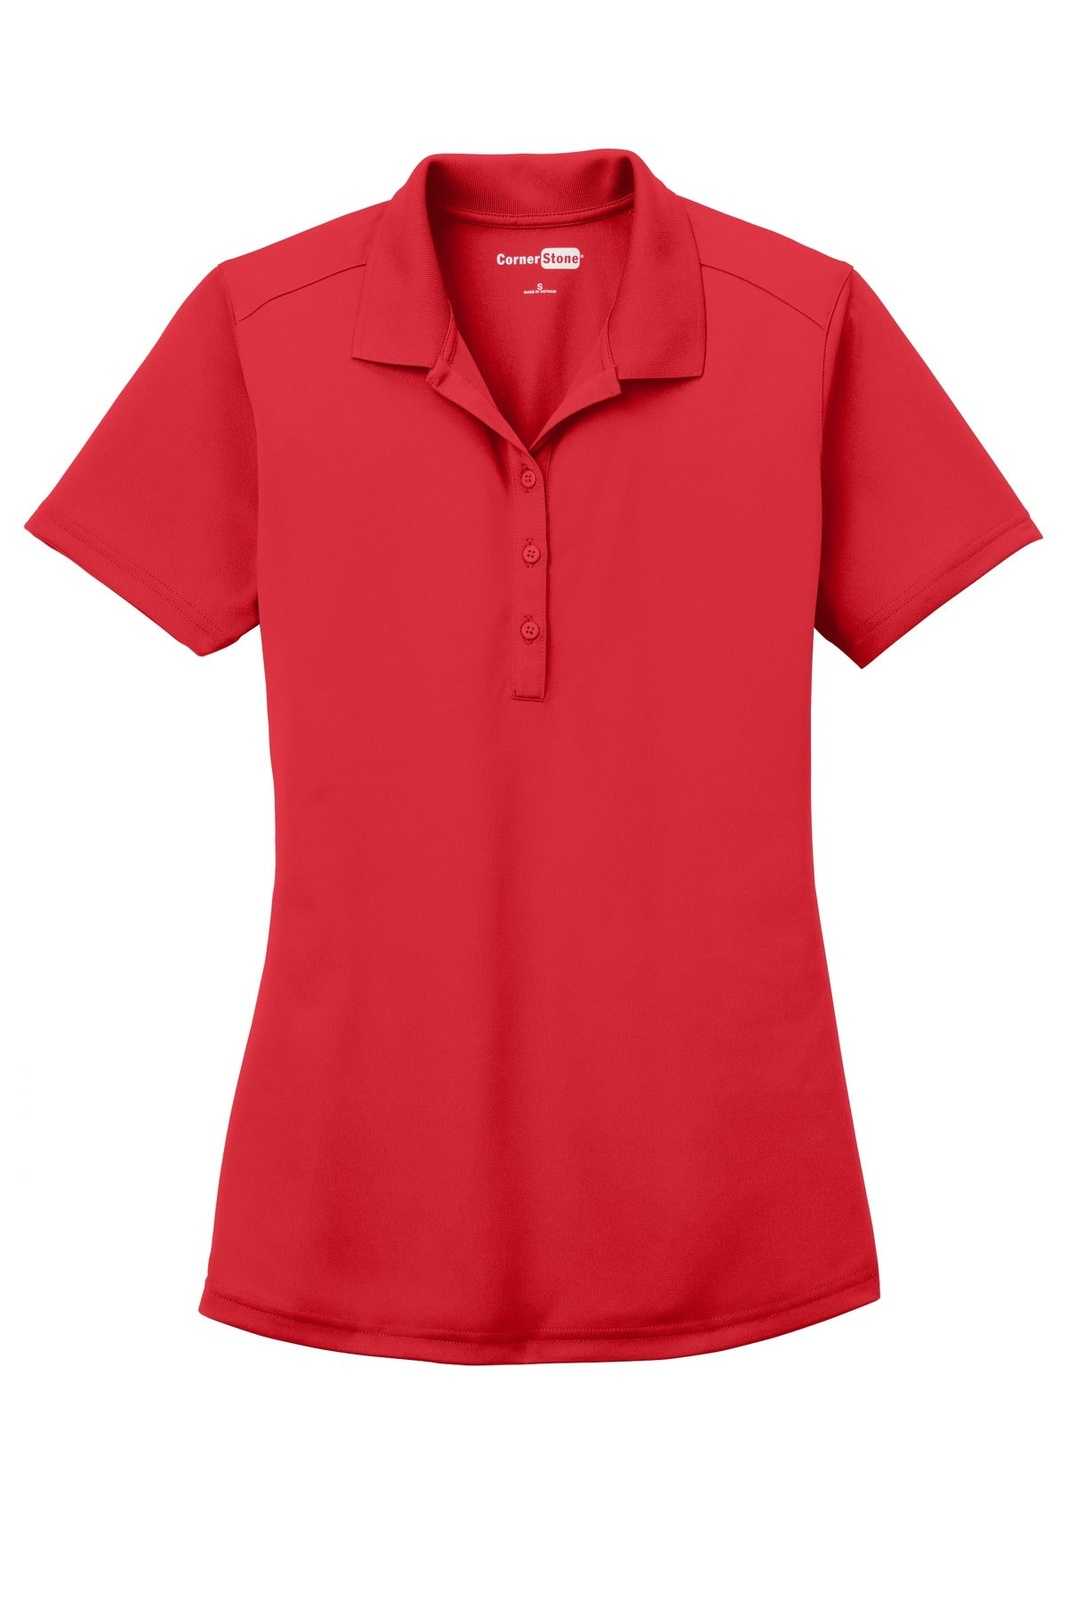 CornerStone CS419 Ladies Select Lightweight Snag-Proof Polo - Red - HIT a Double - 5